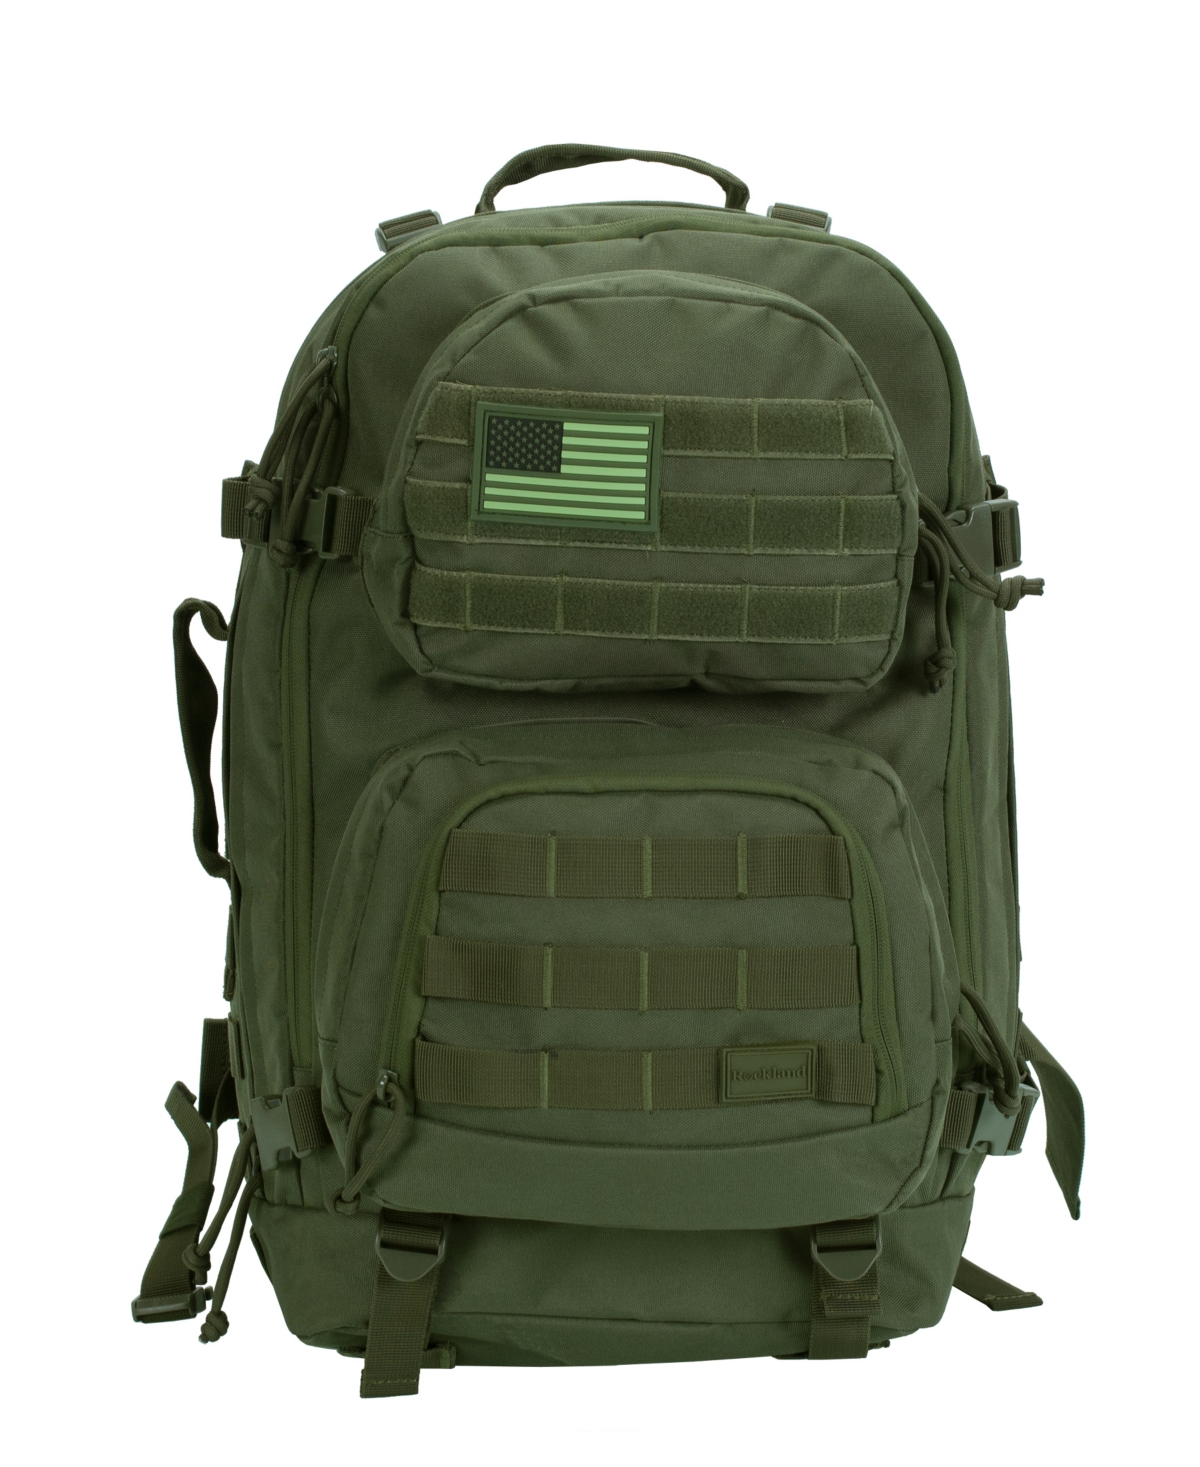 Military Tactical Laptop Backpack - Green